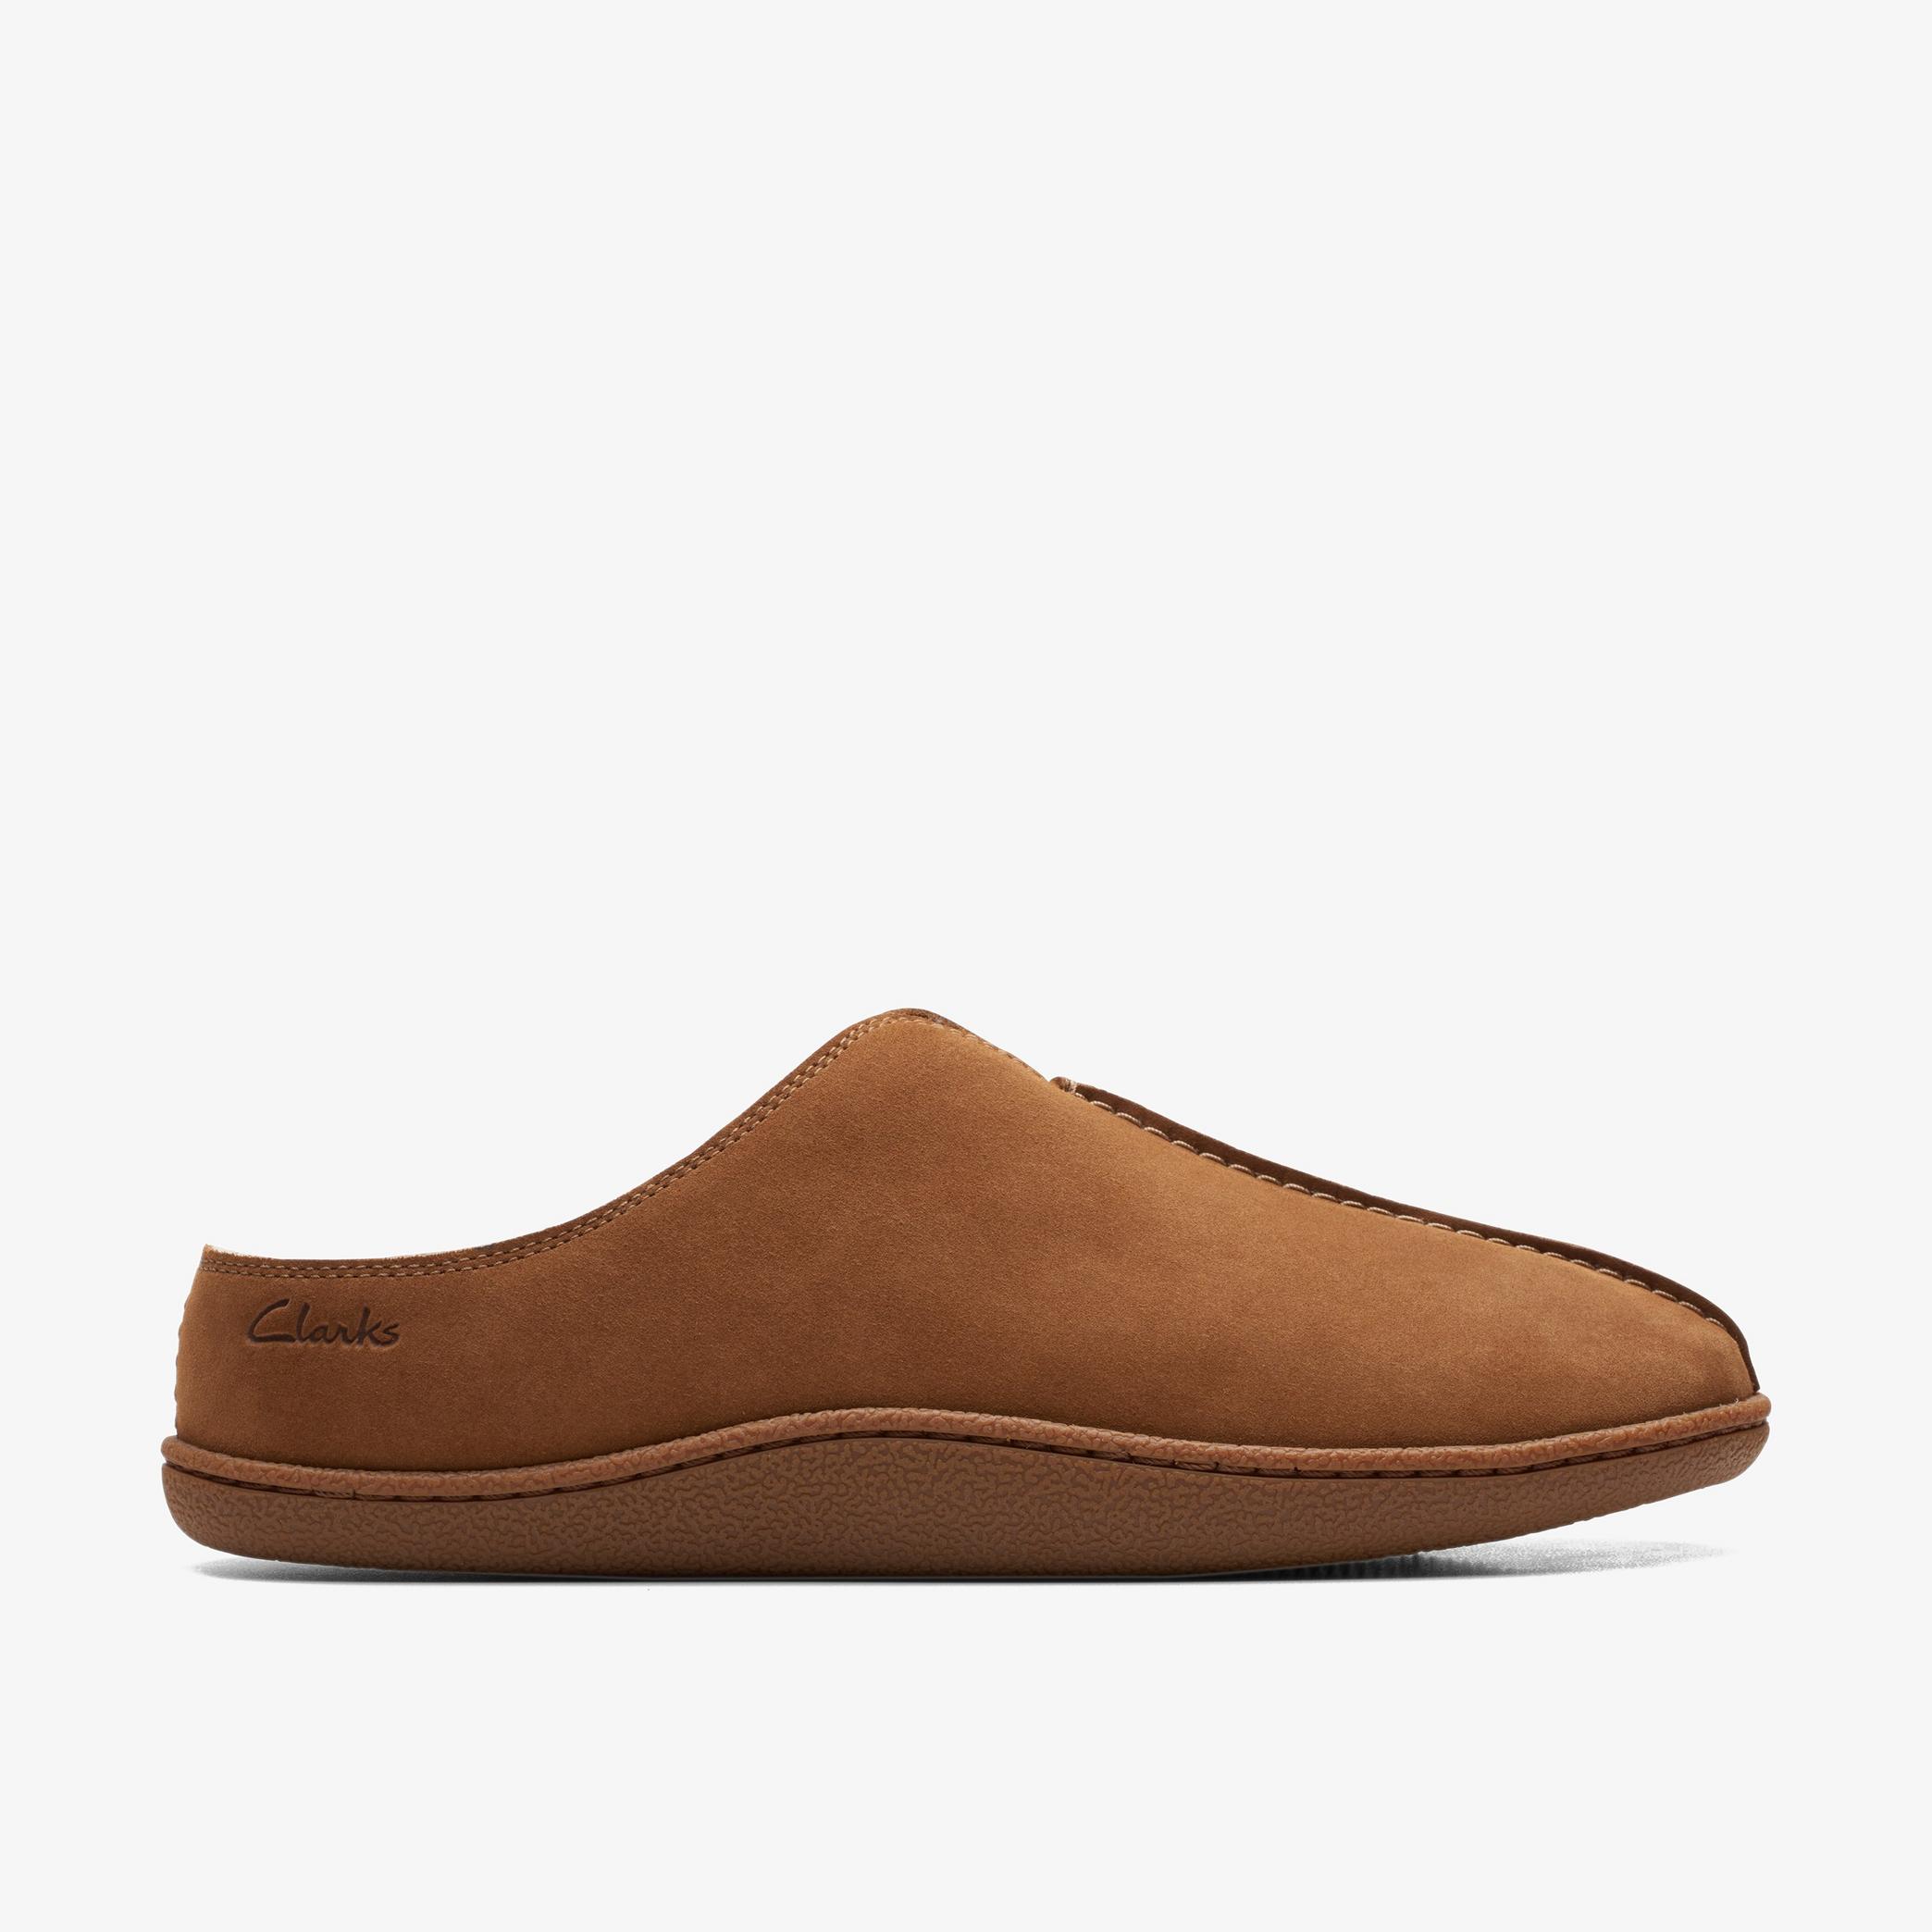 Home Mule Tan Suede Slippers, view 1 of 6